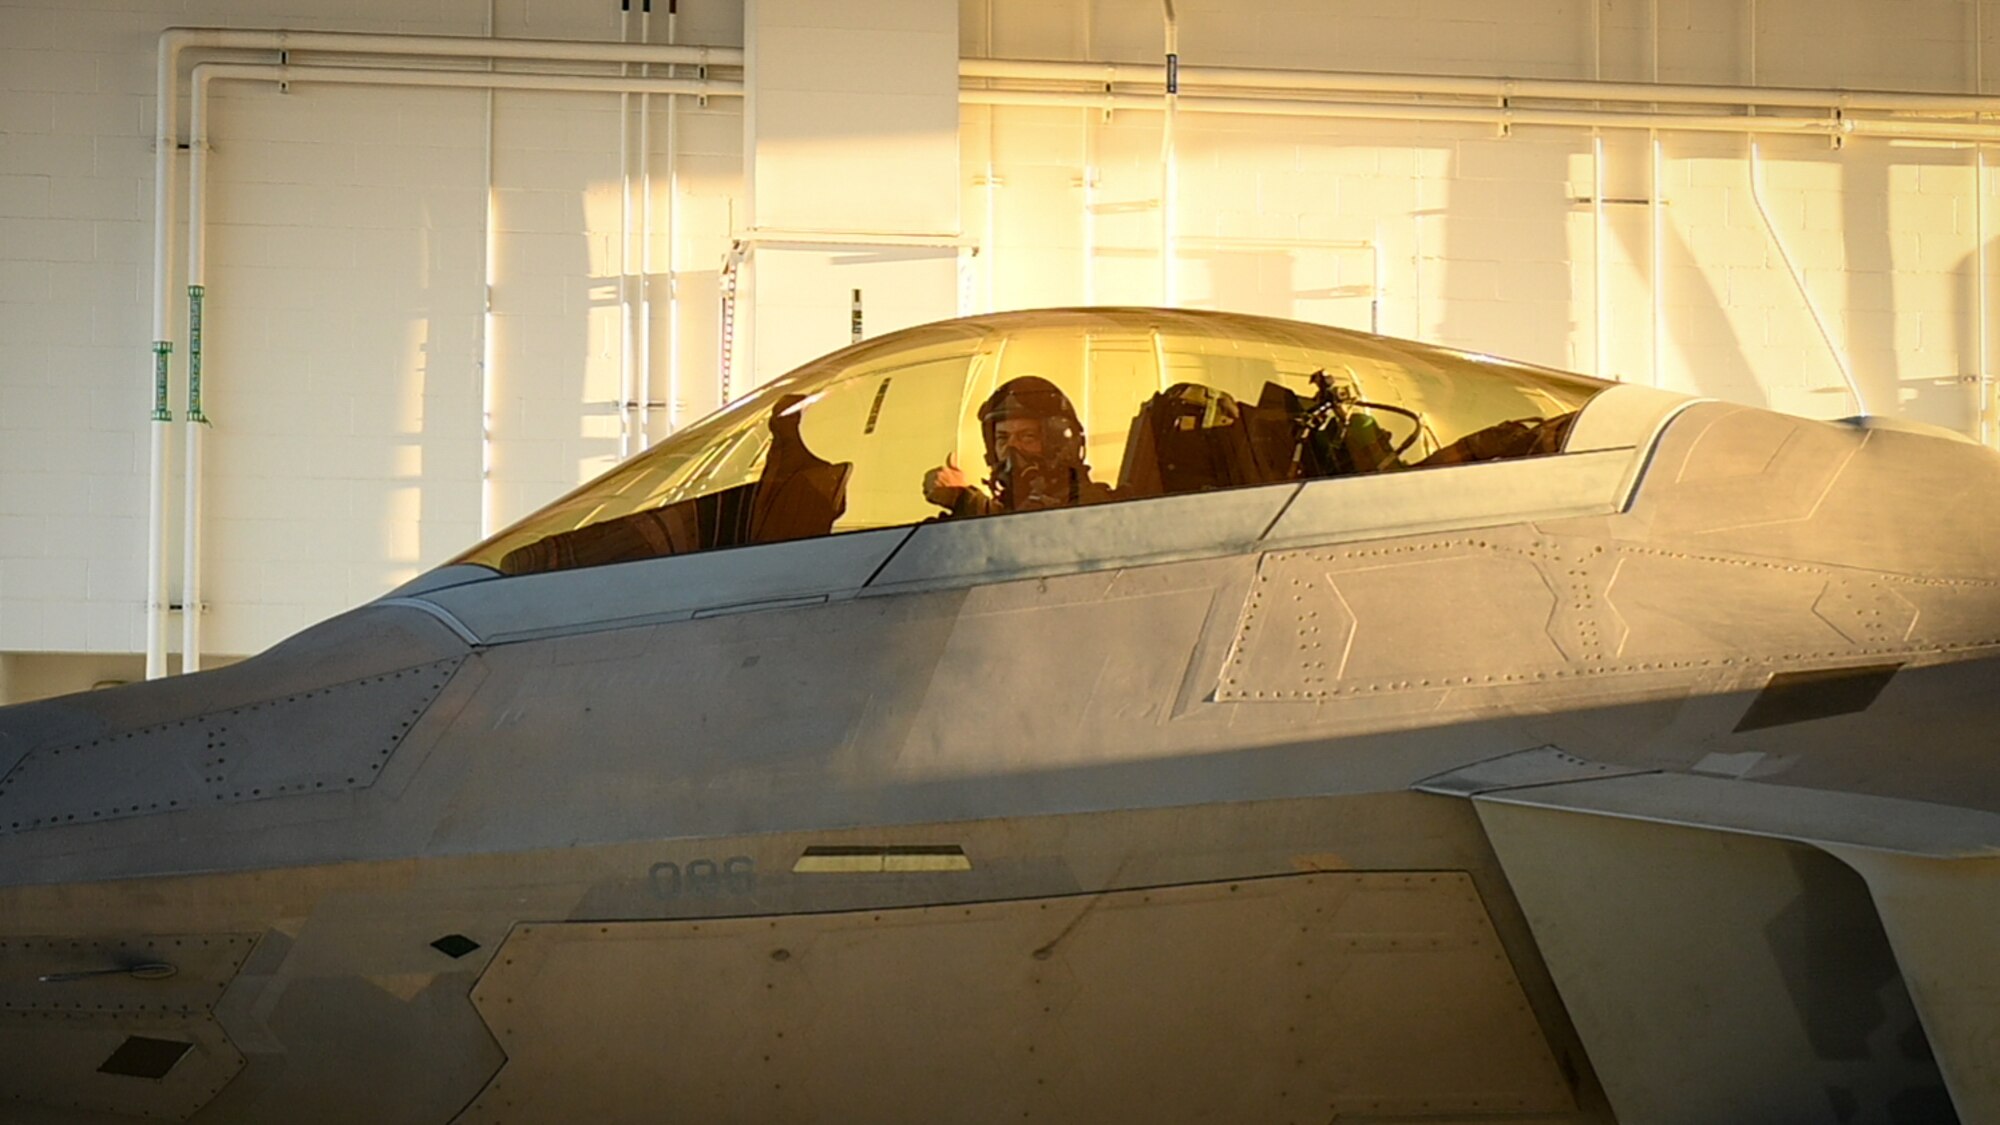 PACAF commander gives a thumbs up before taxi in an F-22 Raptor aircraft.